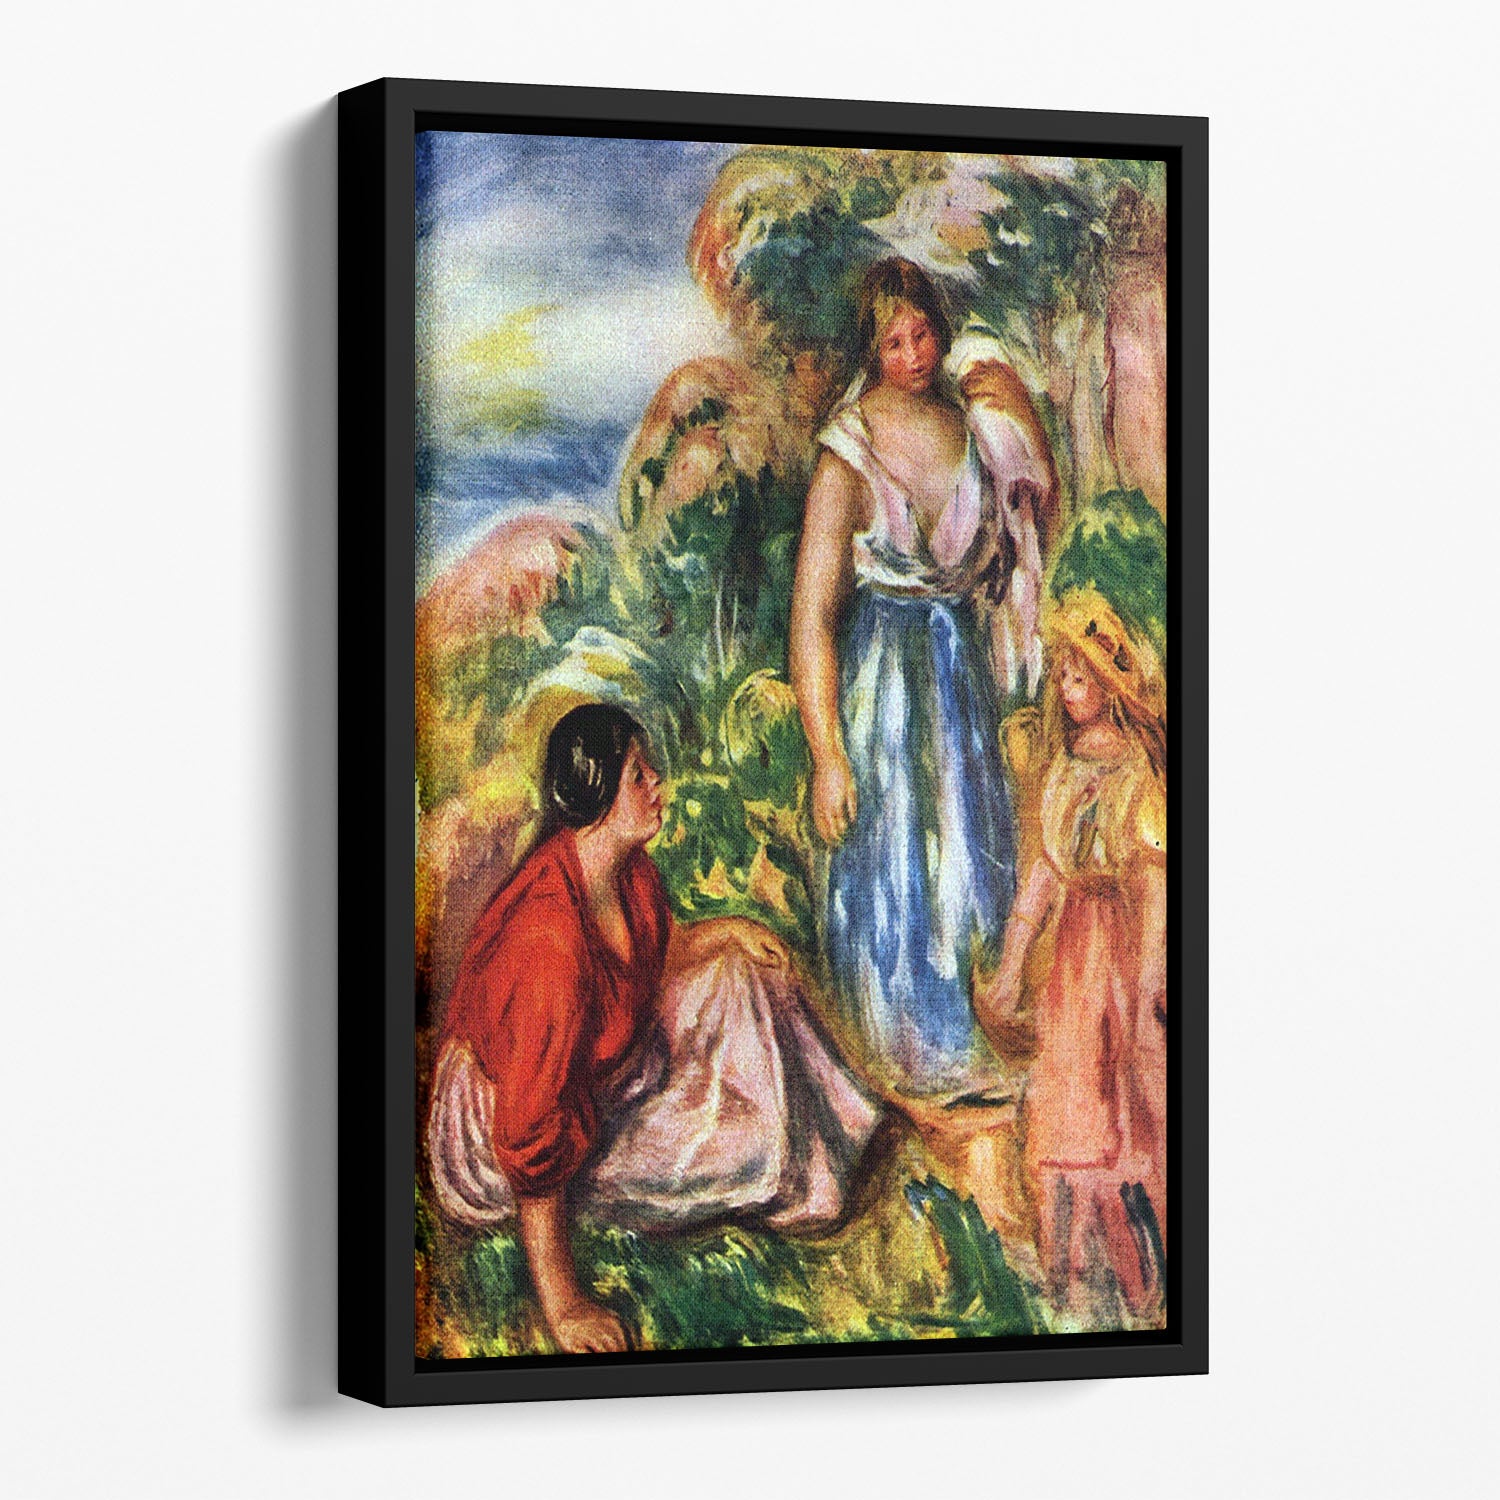 Two women with young girls in a landscape by Renoir Floating Framed Canvas